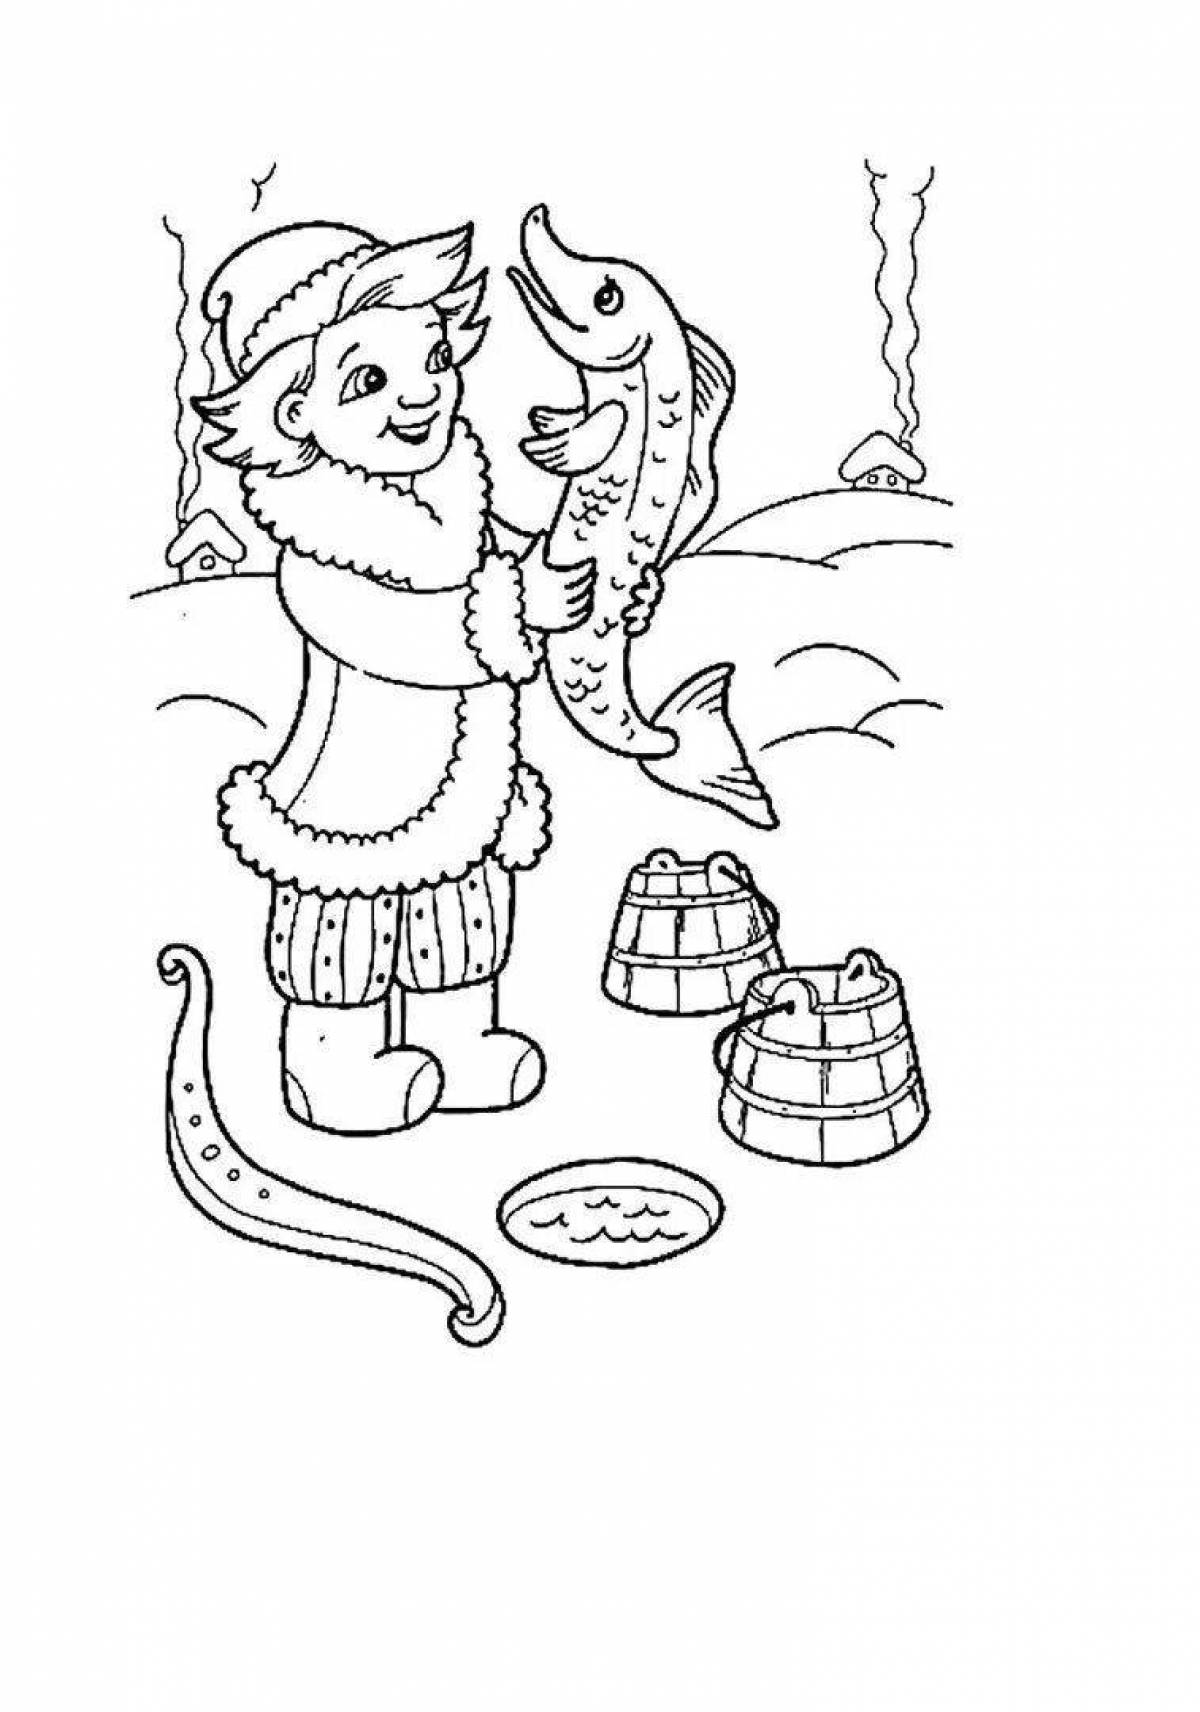 Splendorous coloring page fairy tale by pike